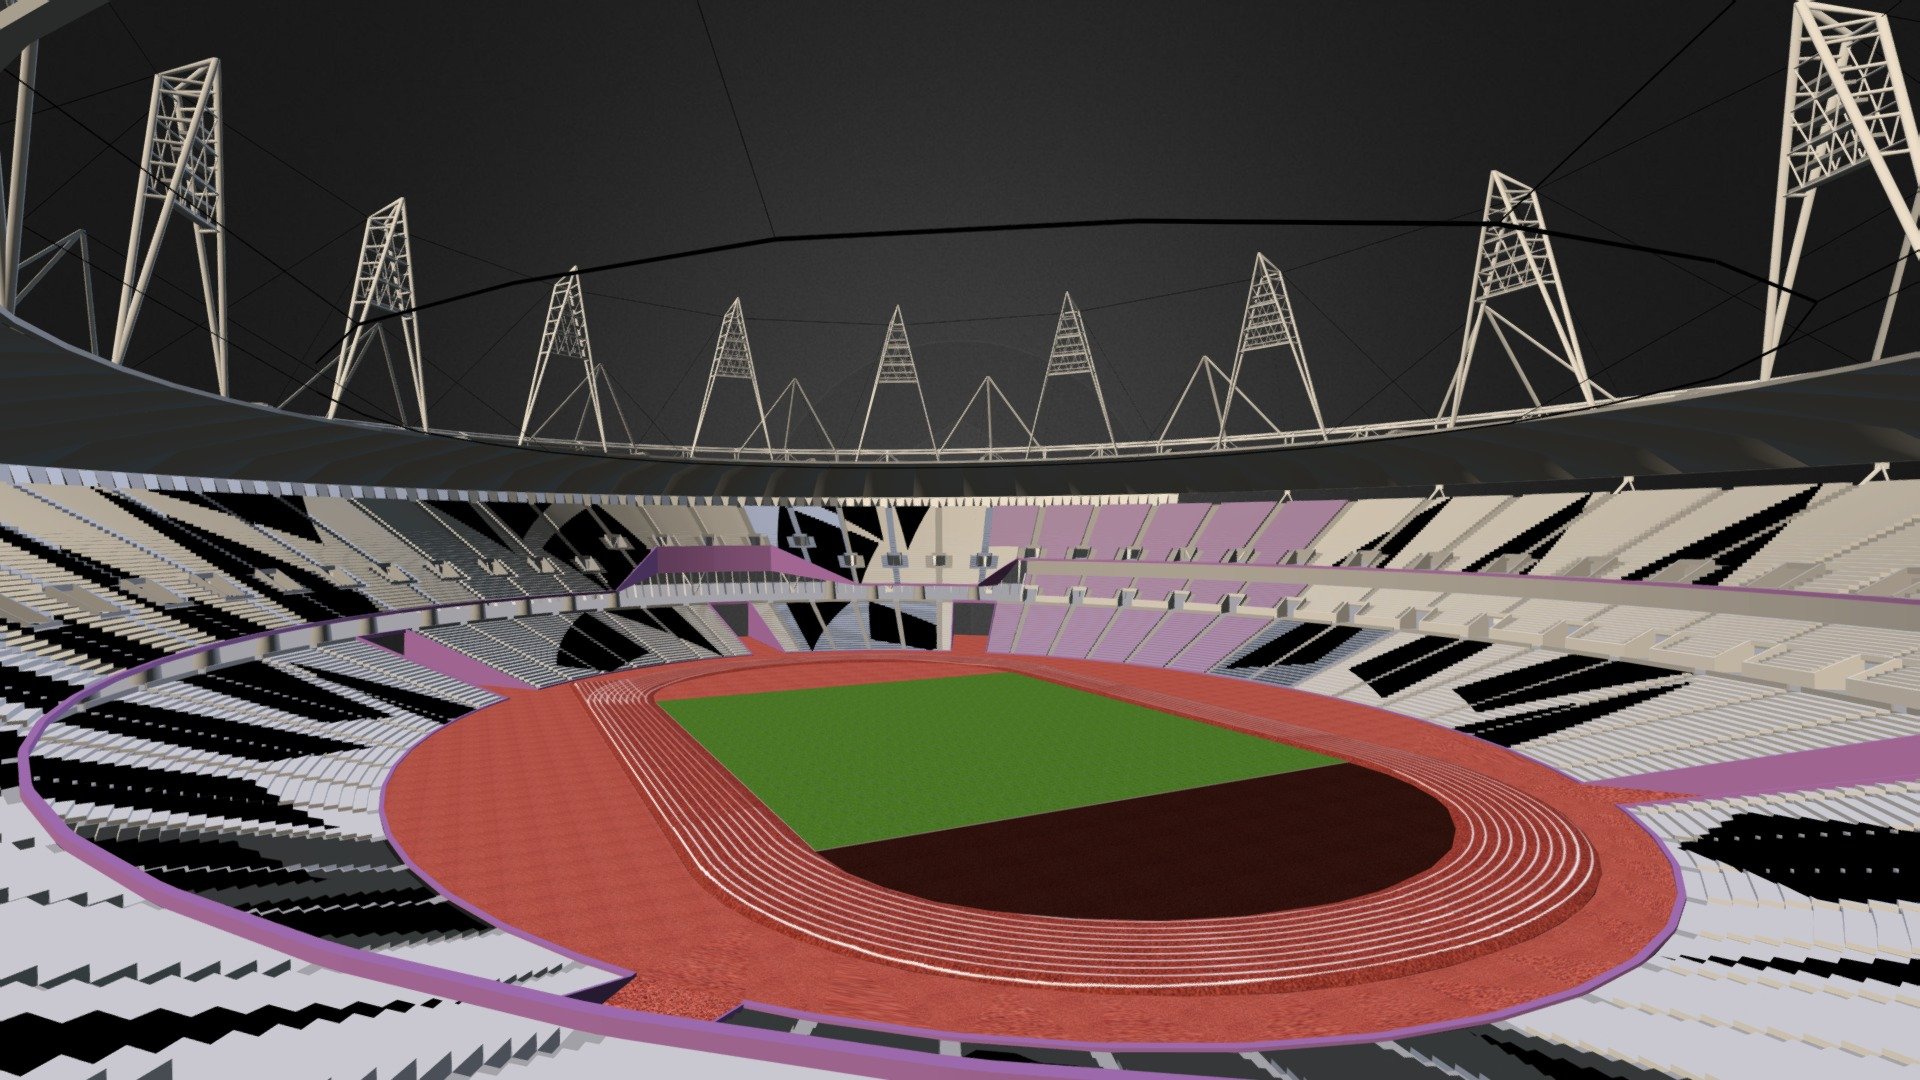 3D model of the Olympic Stadium that was designed for the London2012 Olympic Games. Models shows how the stadium looked before it underwent redevelopment to be turned into a multi-event stadium 3d model